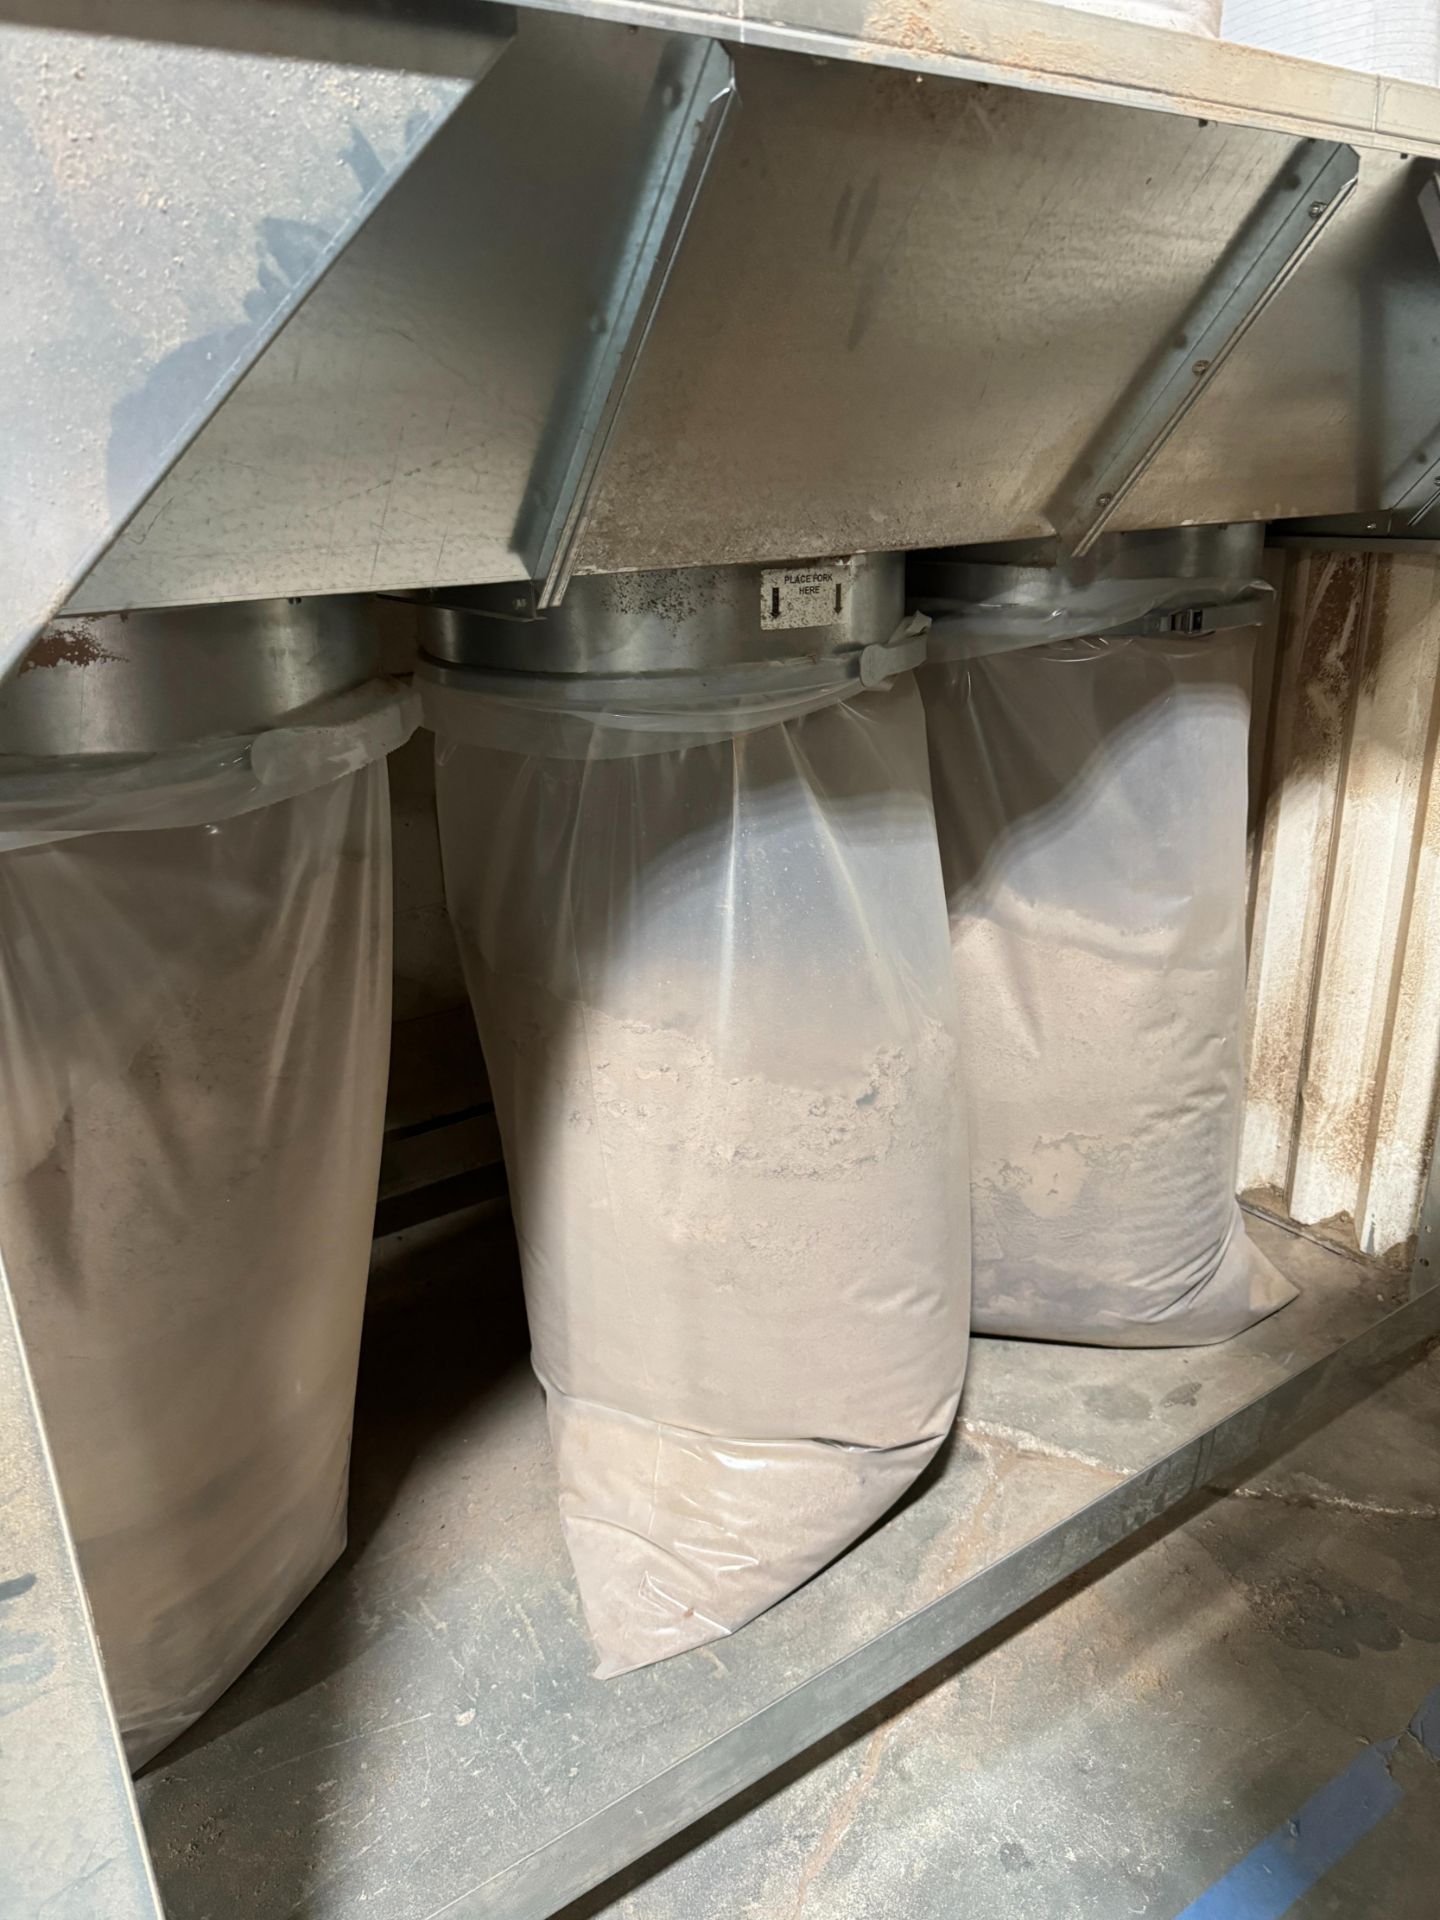 2018 NEDERMAN NFP-S1000 BAG FILTER DUST COLLECTOR, CTR. NO. 18345-00, ITEM NO. 89101009, 10 HP, 3- - Image 6 of 7